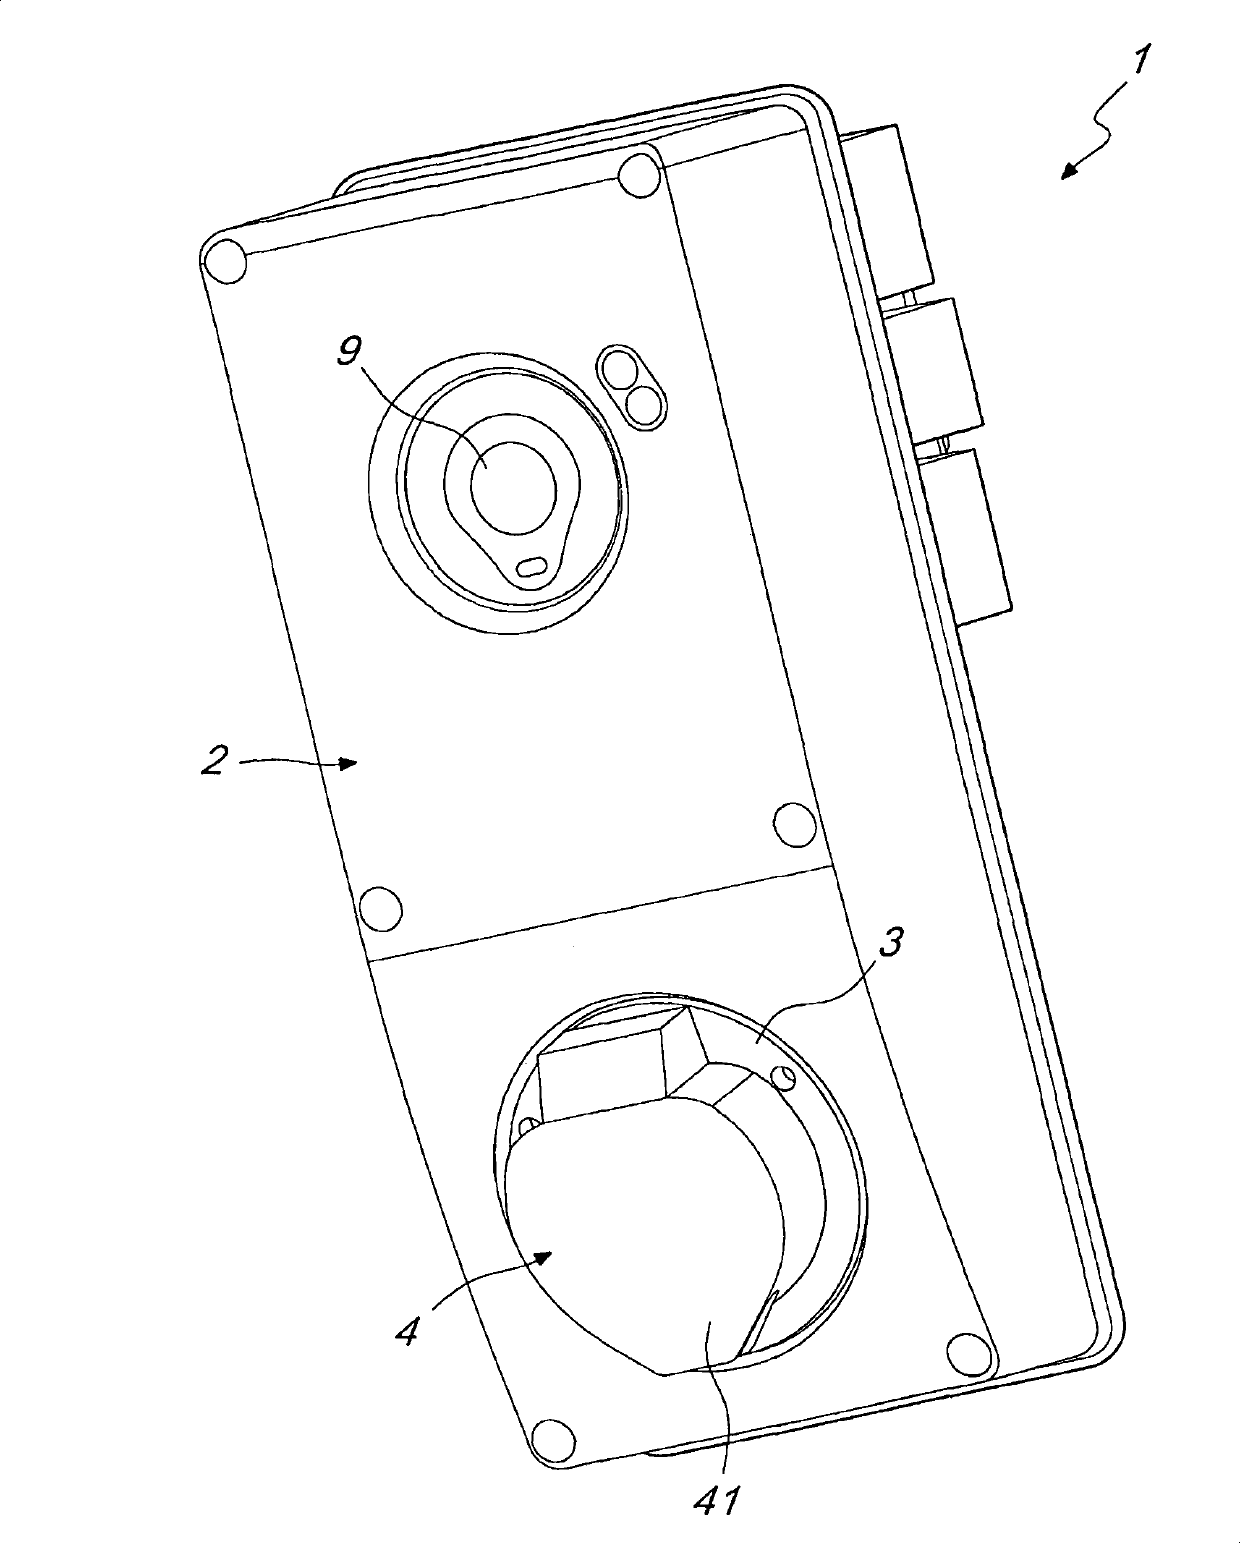 Power supply outlet assembly for powering and/or recharging electric vehicles